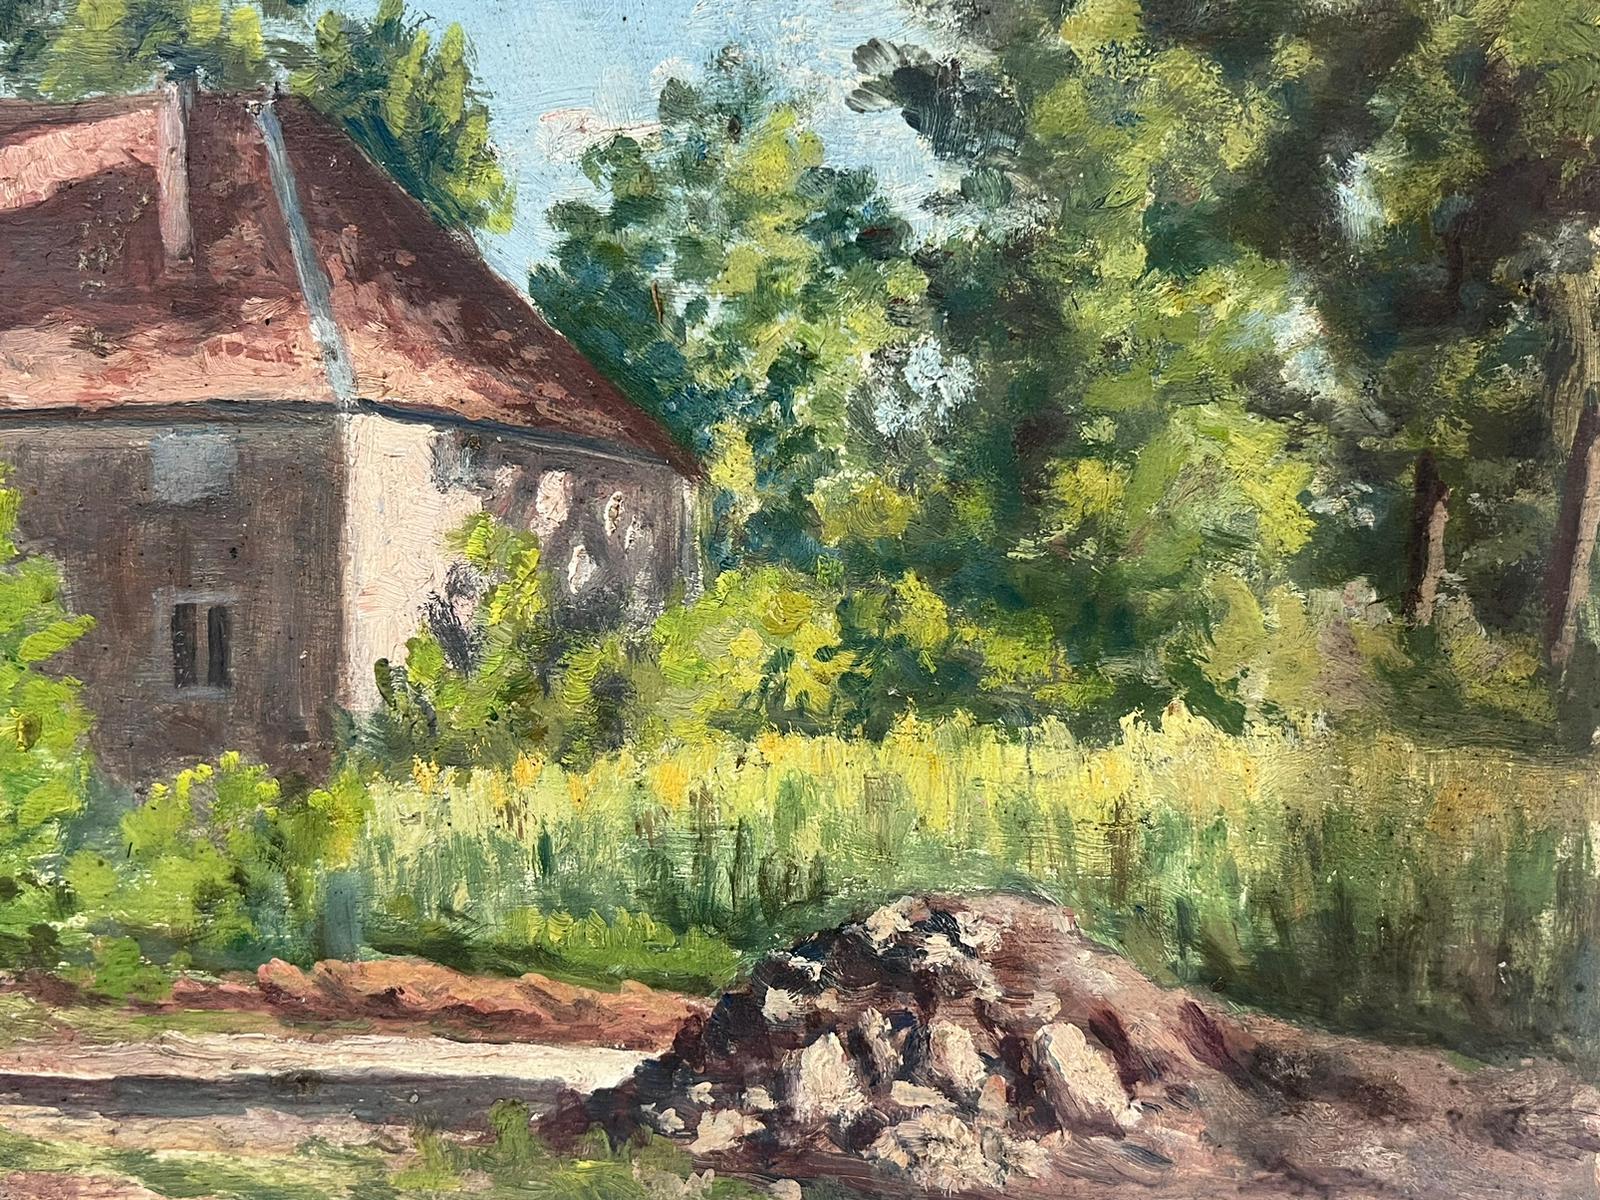 French Countryside Landscape
by Edmond Quinton (French 1892-1969) *see notes below
oil painting on board/ panel, unframed
size: 8 x 9.5 inches
condition: overall good and sound, some age related marks and old dirt, all four corners and edges worn